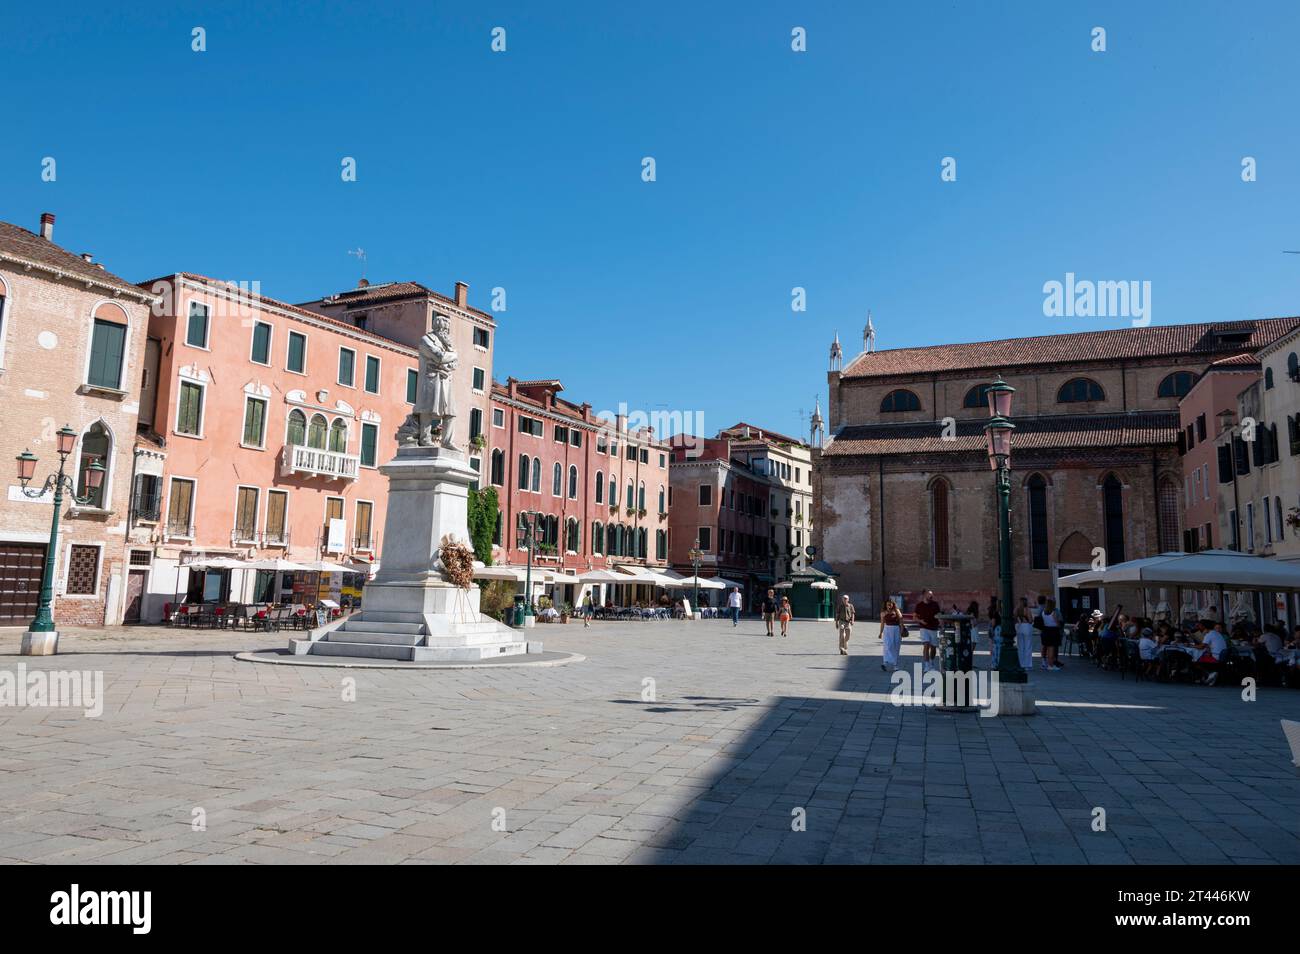 Camp S. Stefano is a large city square lined with cafes, restaurants and nightclubs popular with tourists near the Ponte dell'Accademia, in Venice in the Stock Photo